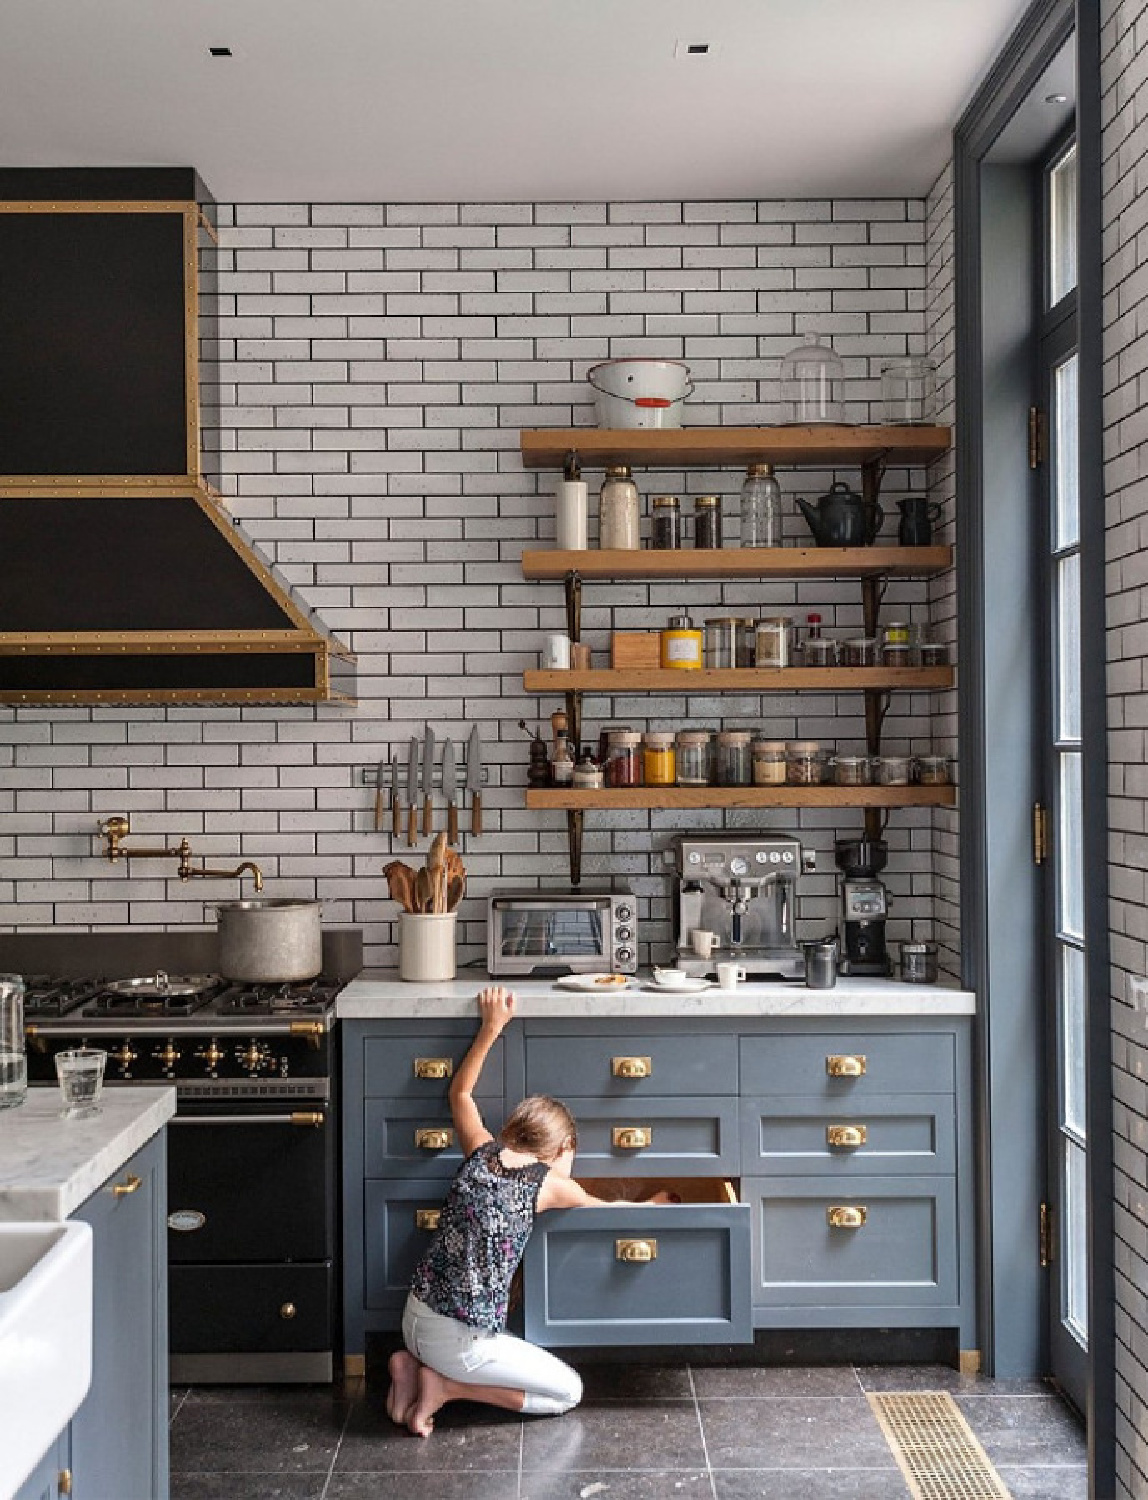 Amazing grey blue pained Shaker cabinets in a NY townhouse kitchen with open shelves, subway tile, brass hardware, and black Lacanche range. Ali Cayne of Haven Kitchen. #graykitchen #greyblue #kitchendesign #openshelves #lacanche #subwaytile #graycabinets #brasshardware